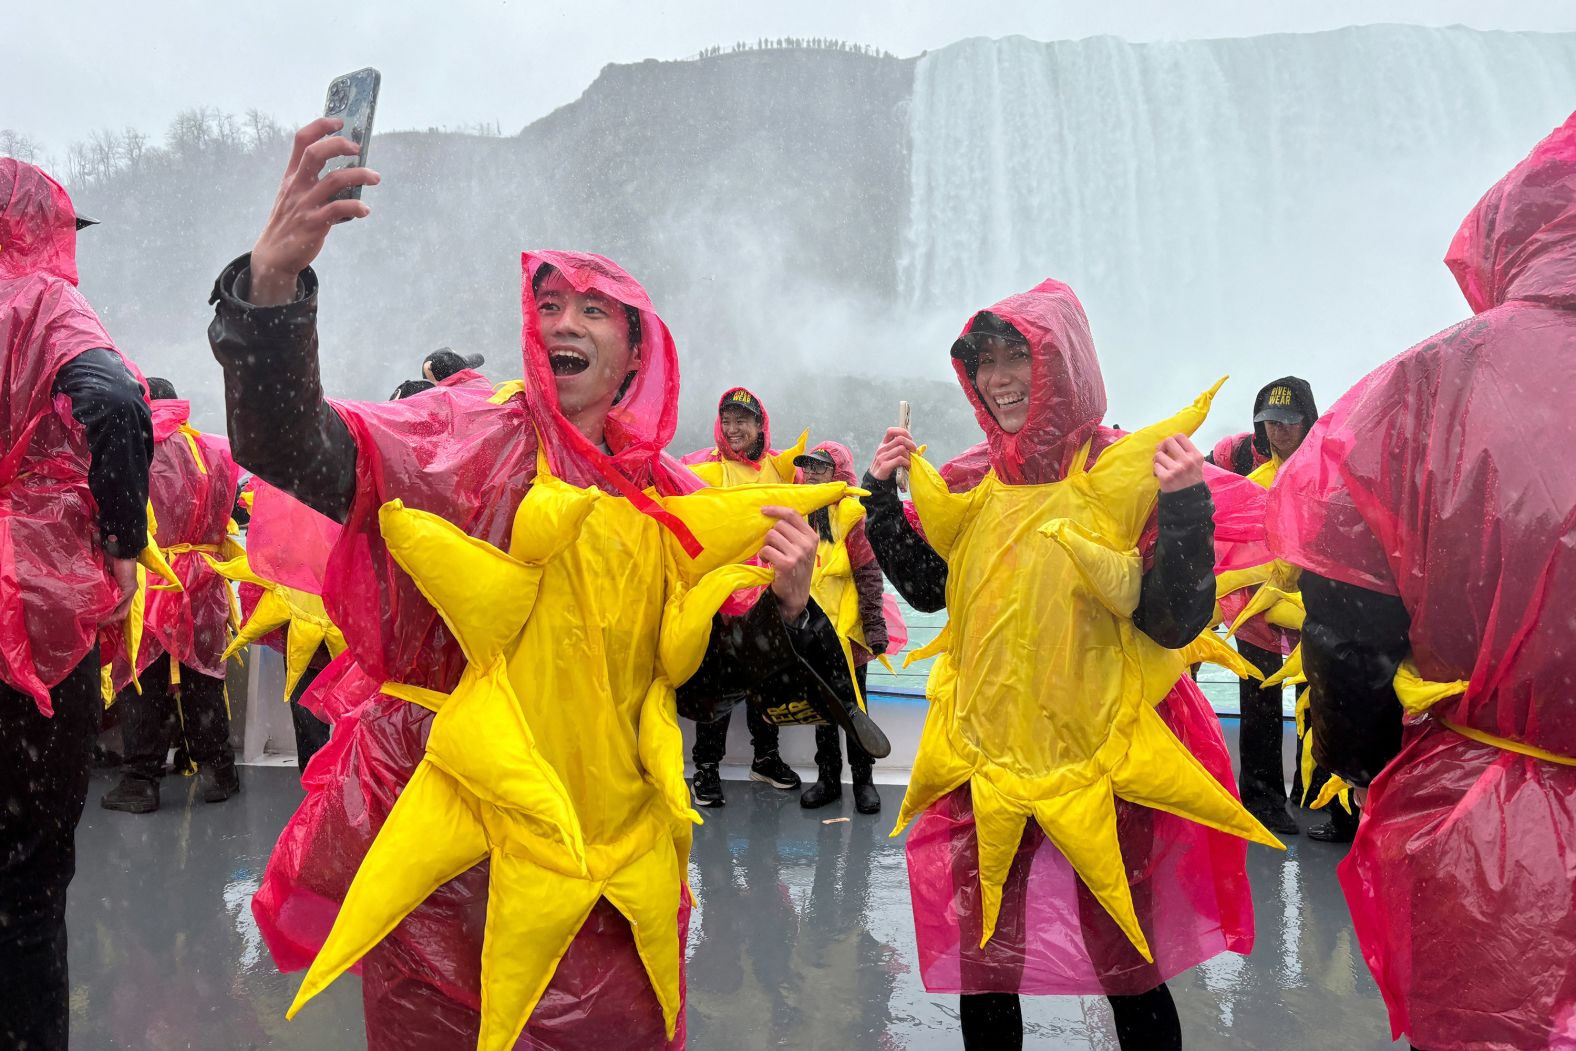 People in Niagara Falls gather on a sightseeing boat to break the Guinness World Record for the largest group of people dressed as the sun (309).